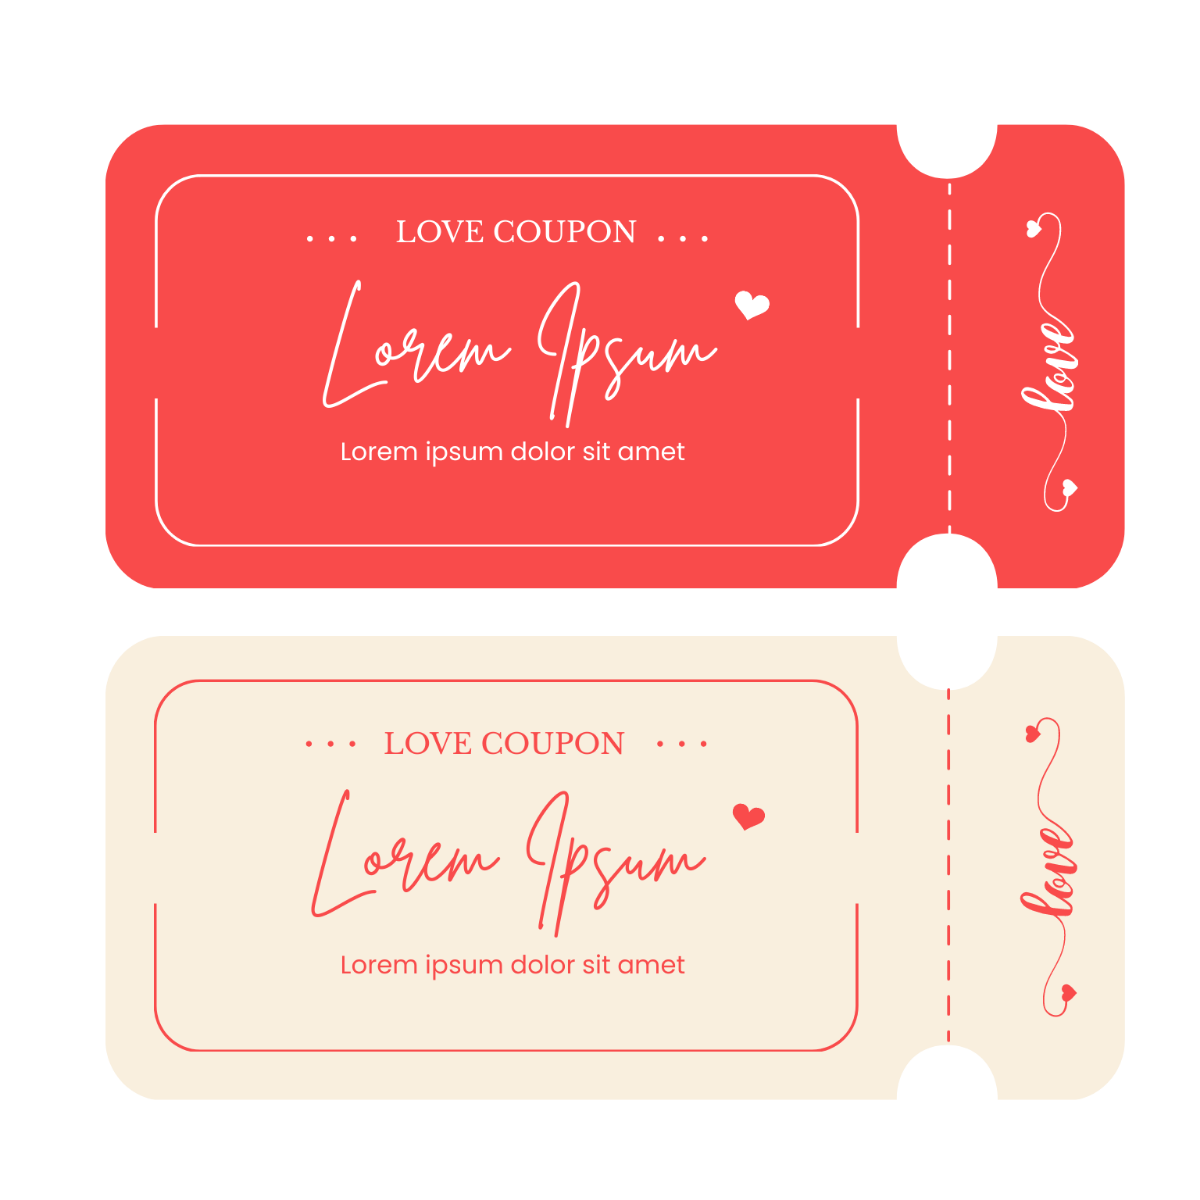 Love Coupon Vector